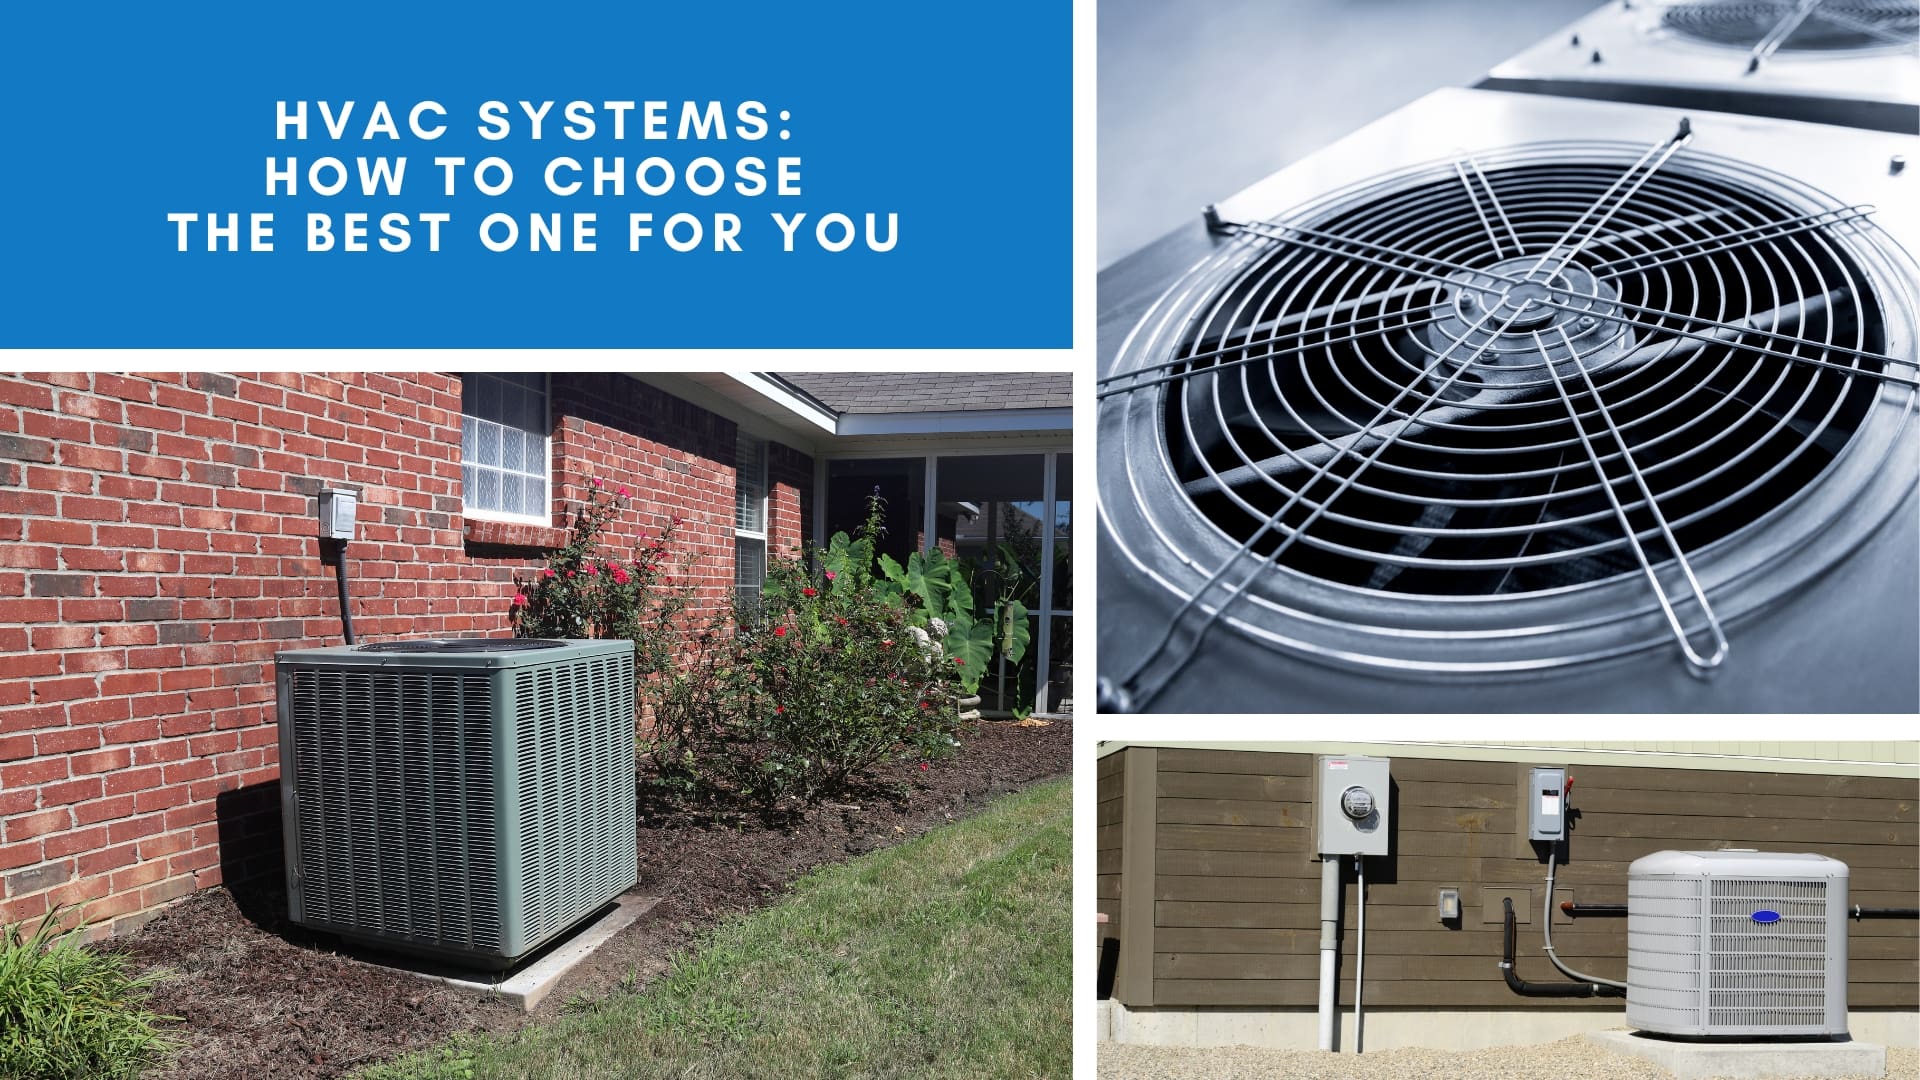 HVAC Systems How To Choose The Best One For You